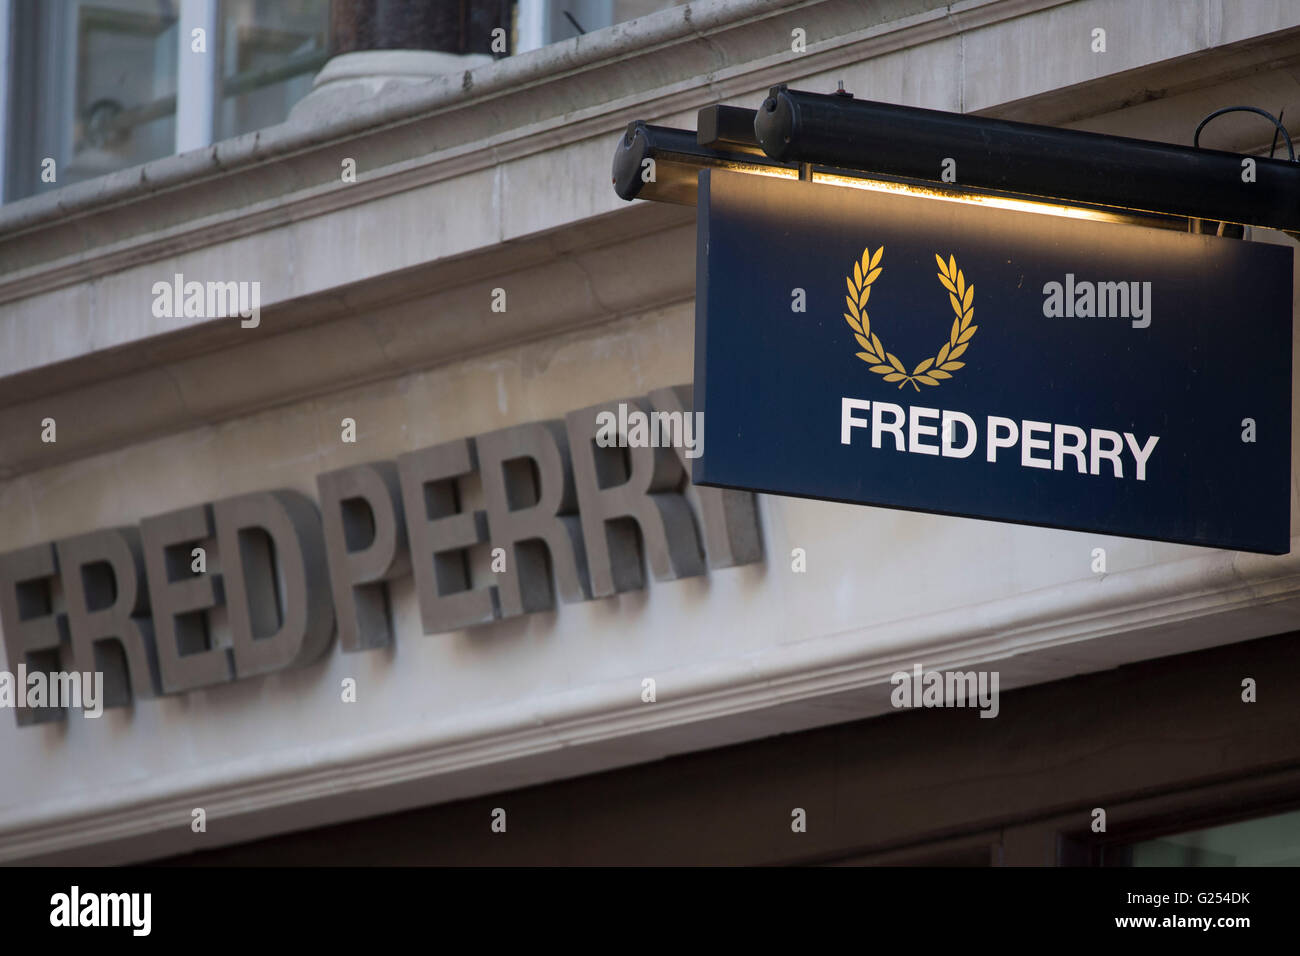 Fred Perry clothes store shop sign logo Stock Photo